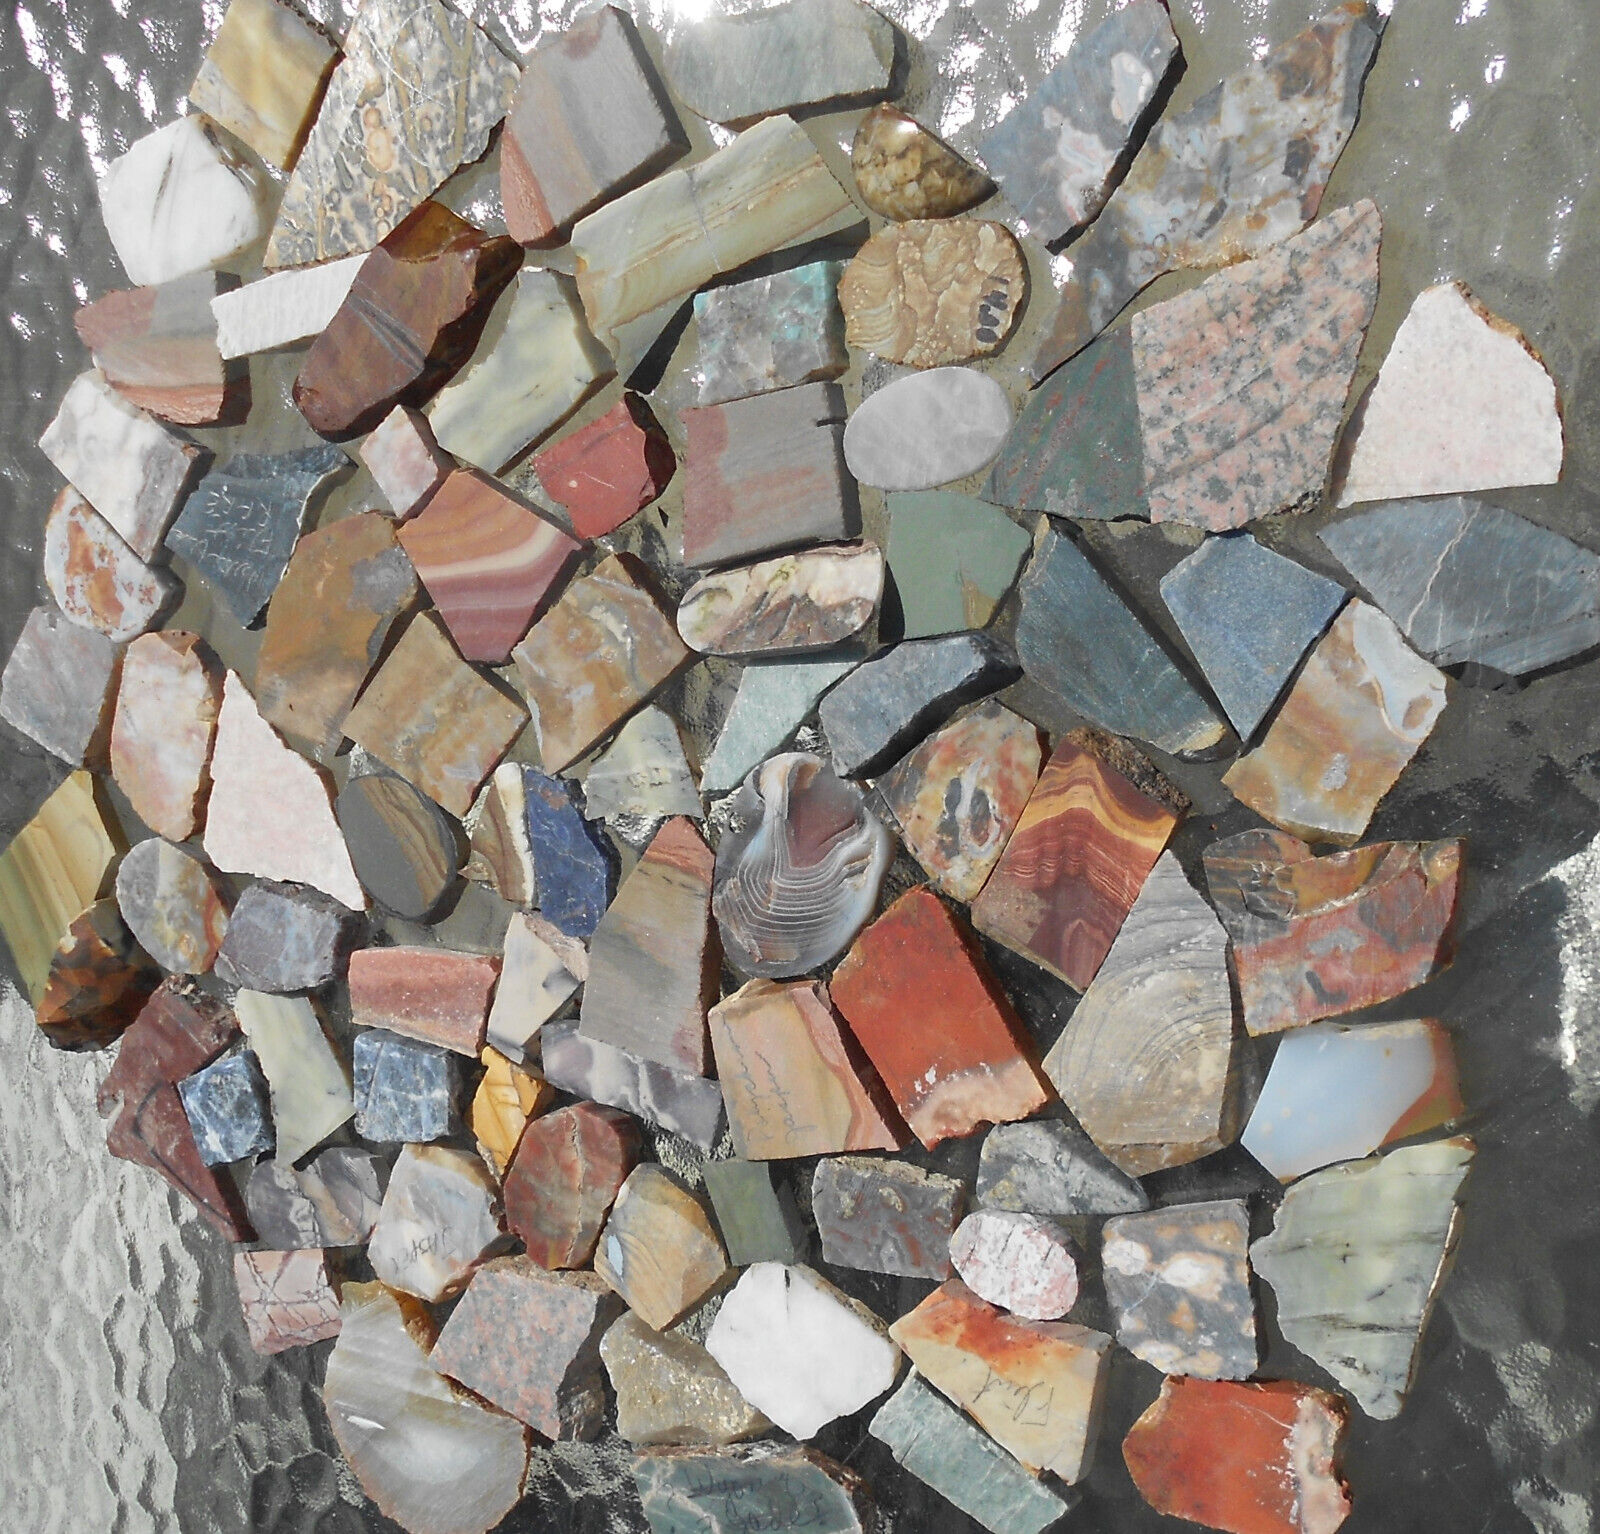 A variety of small semiprecious stone slab for over 100 cabachons, 1/4 in. thick